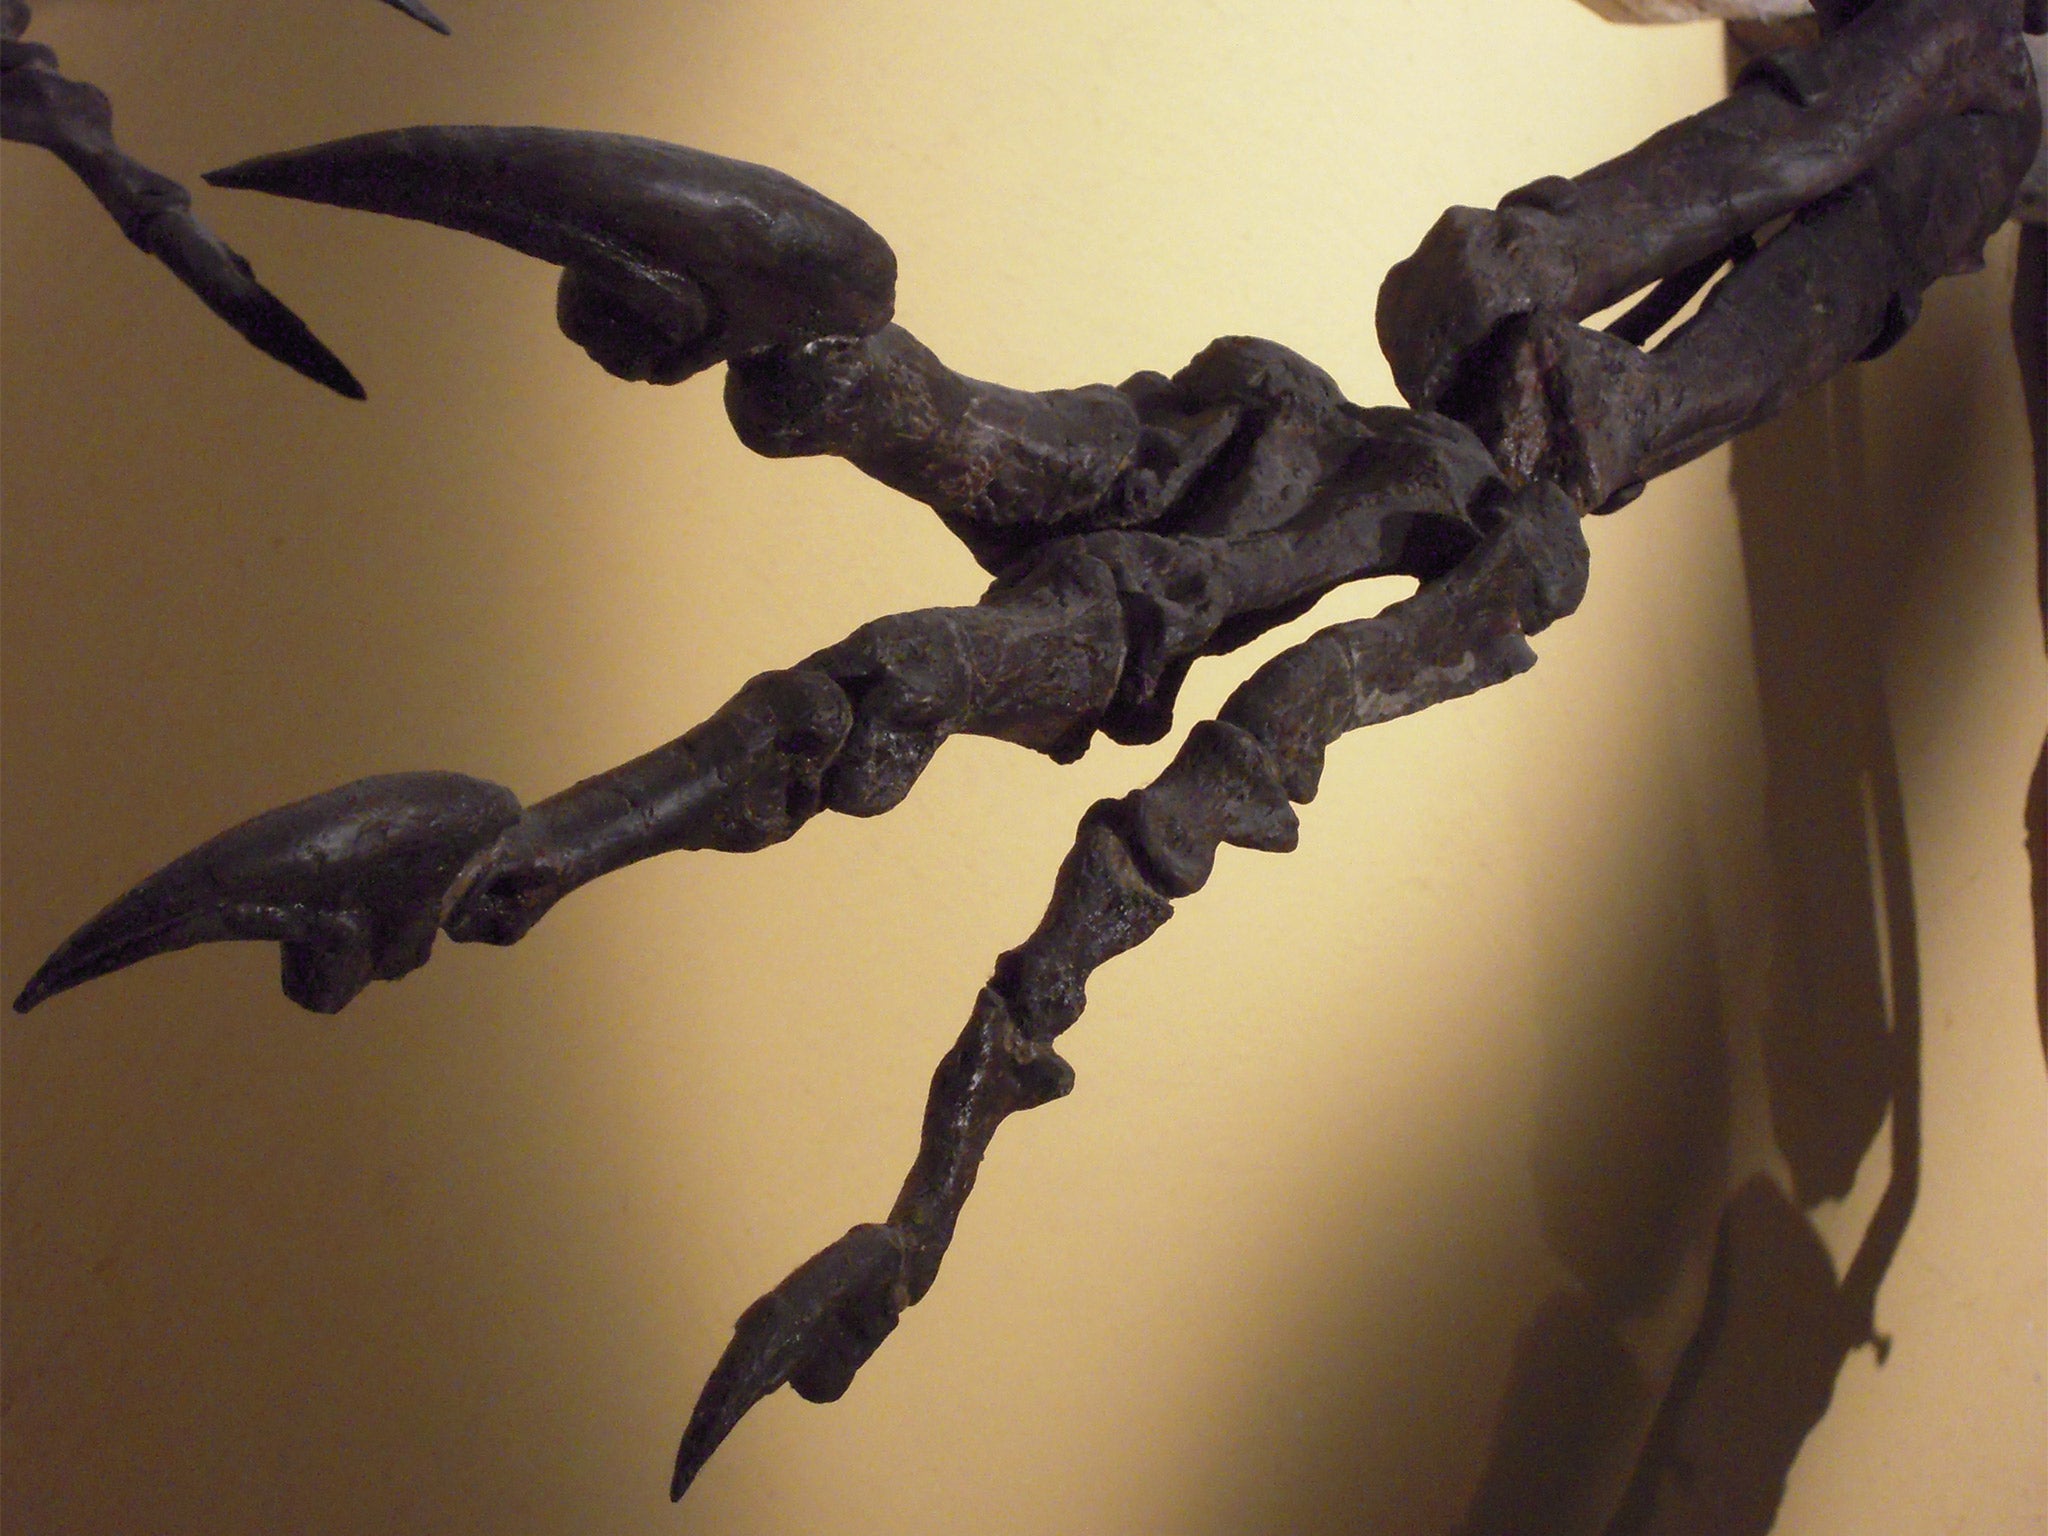 Clawed left hand of an Allosaurus, part the theropod group of dinosaurs. File photo